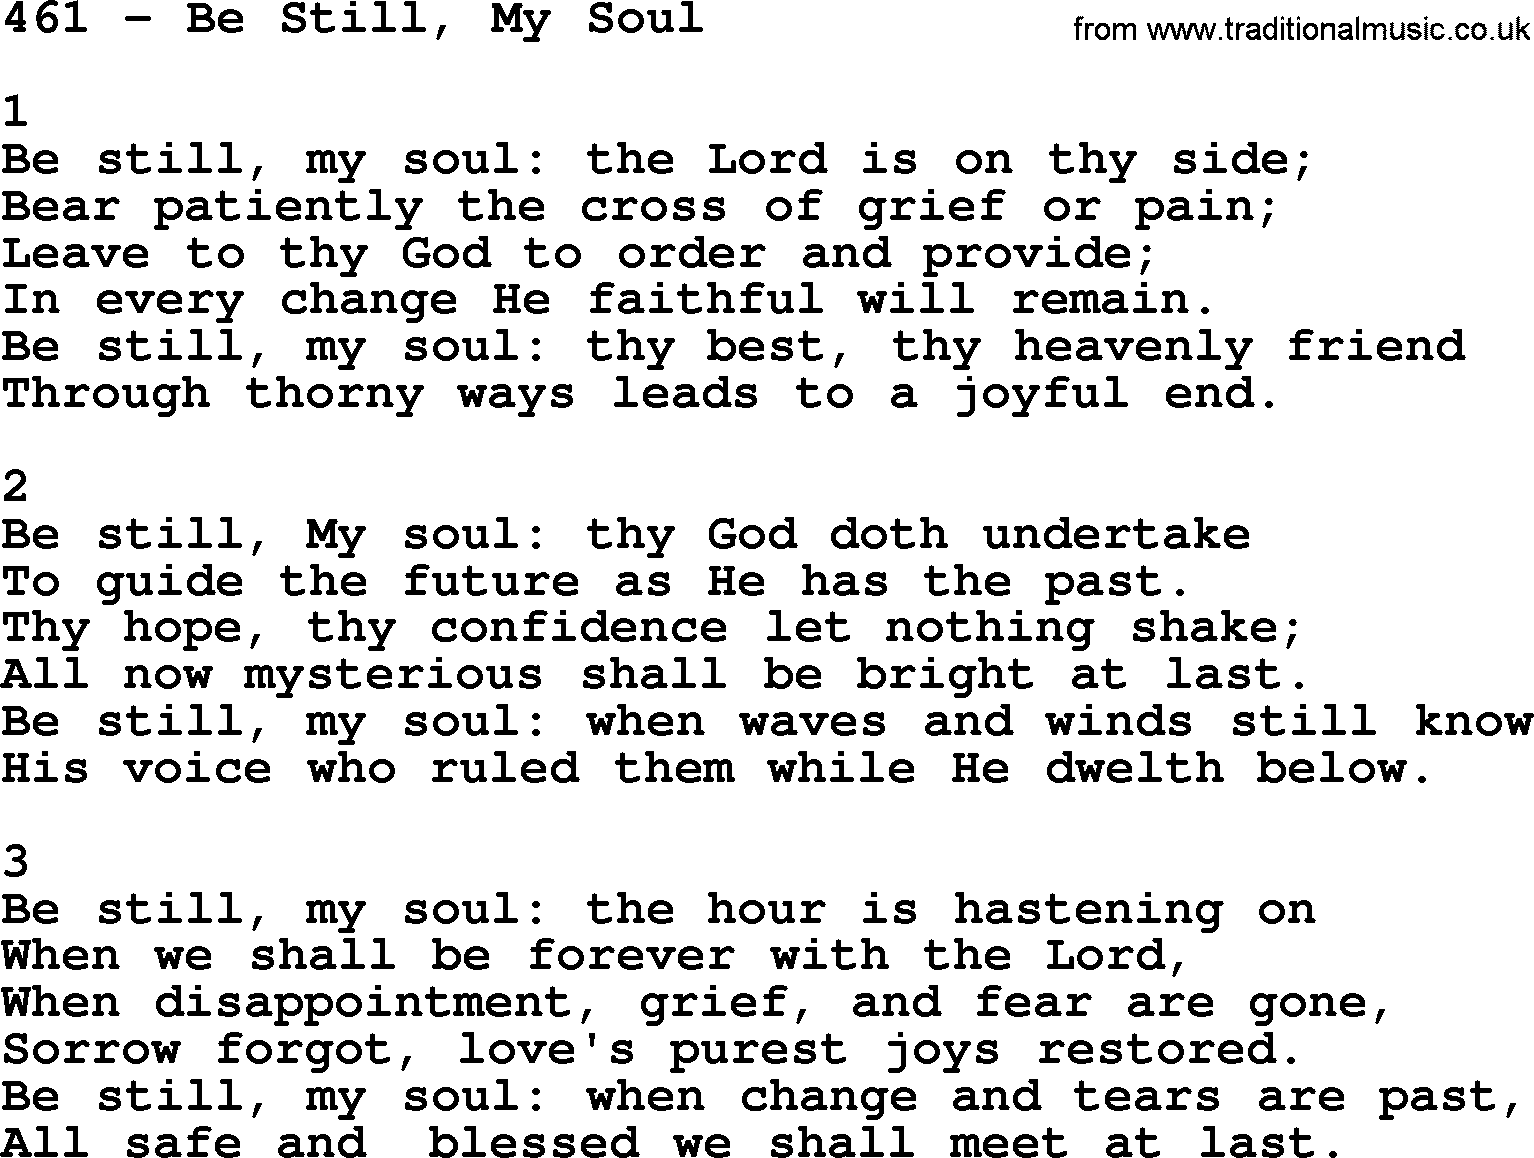 Complete Adventis Hymnal, title: 461-Be Still, My Soul, with lyrics, midi, mp3, powerpoints(PPT) and PDF,